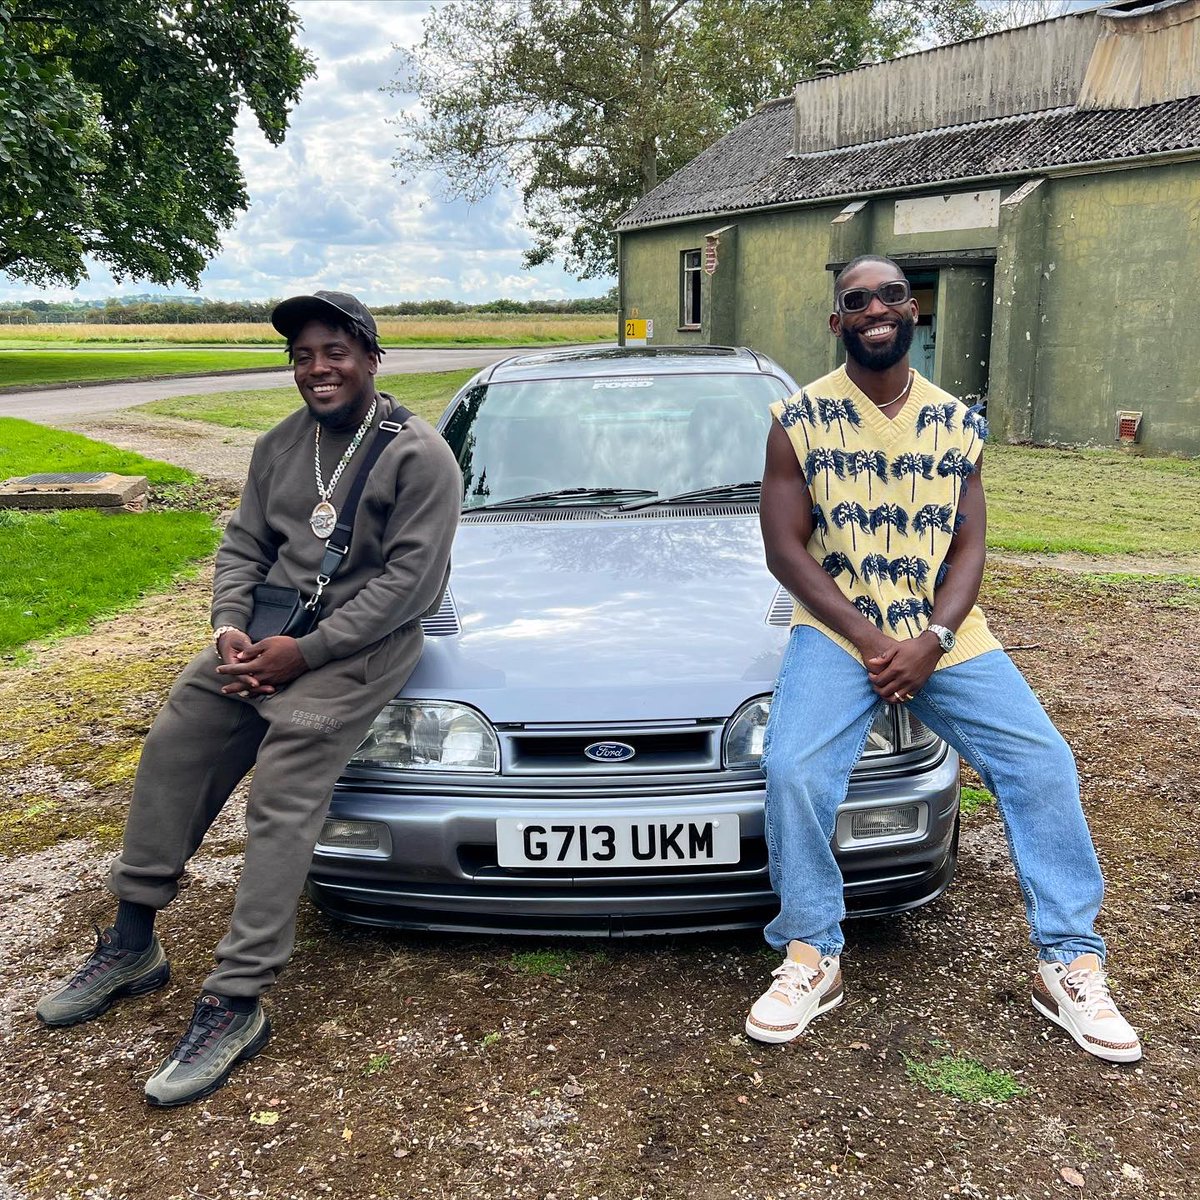 Thanks for all the love so far. The first episode of #BANGERS 🛻 dropped on @channel4 last night and is available to watch on catch up. Skrrr skrrr skrrr